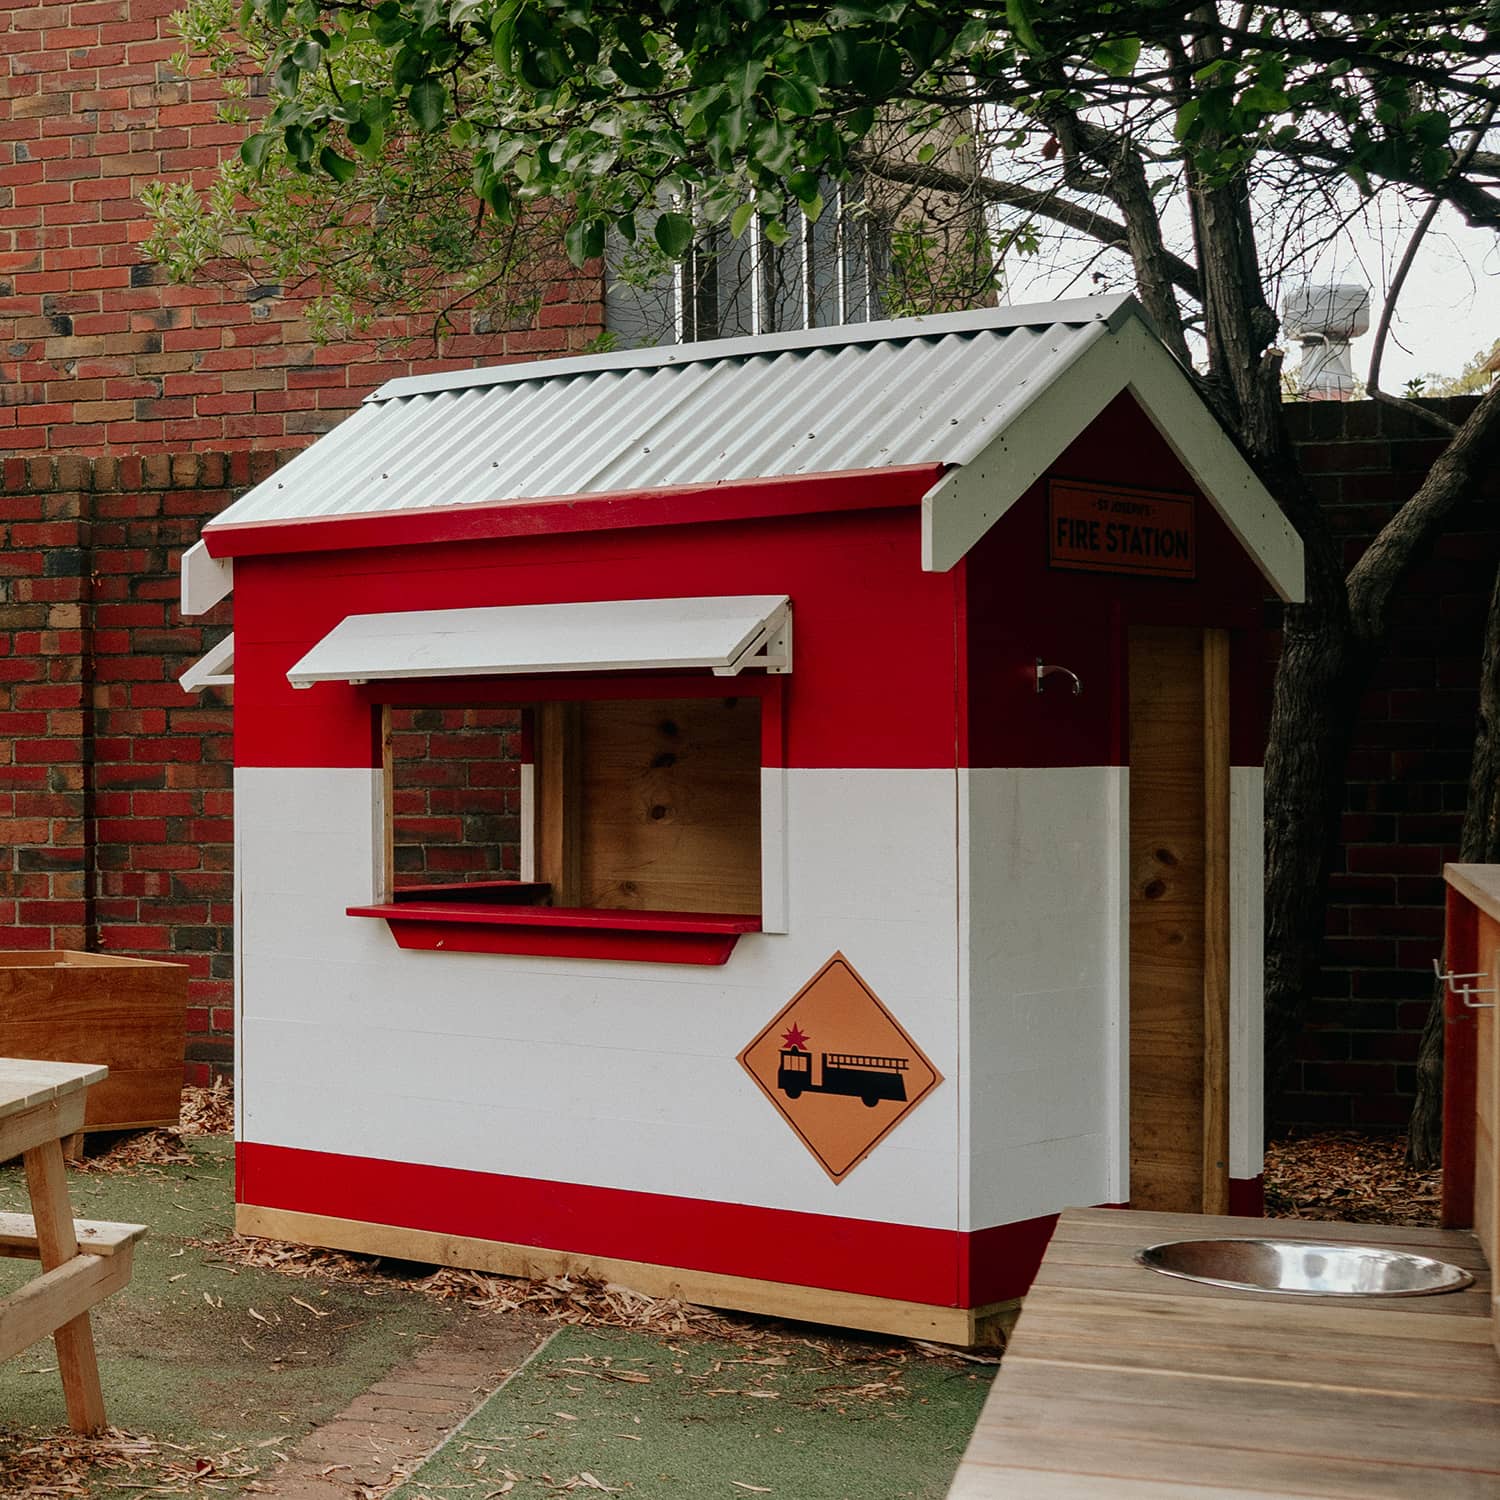 A painted fire station wooden cubby house in a school playground